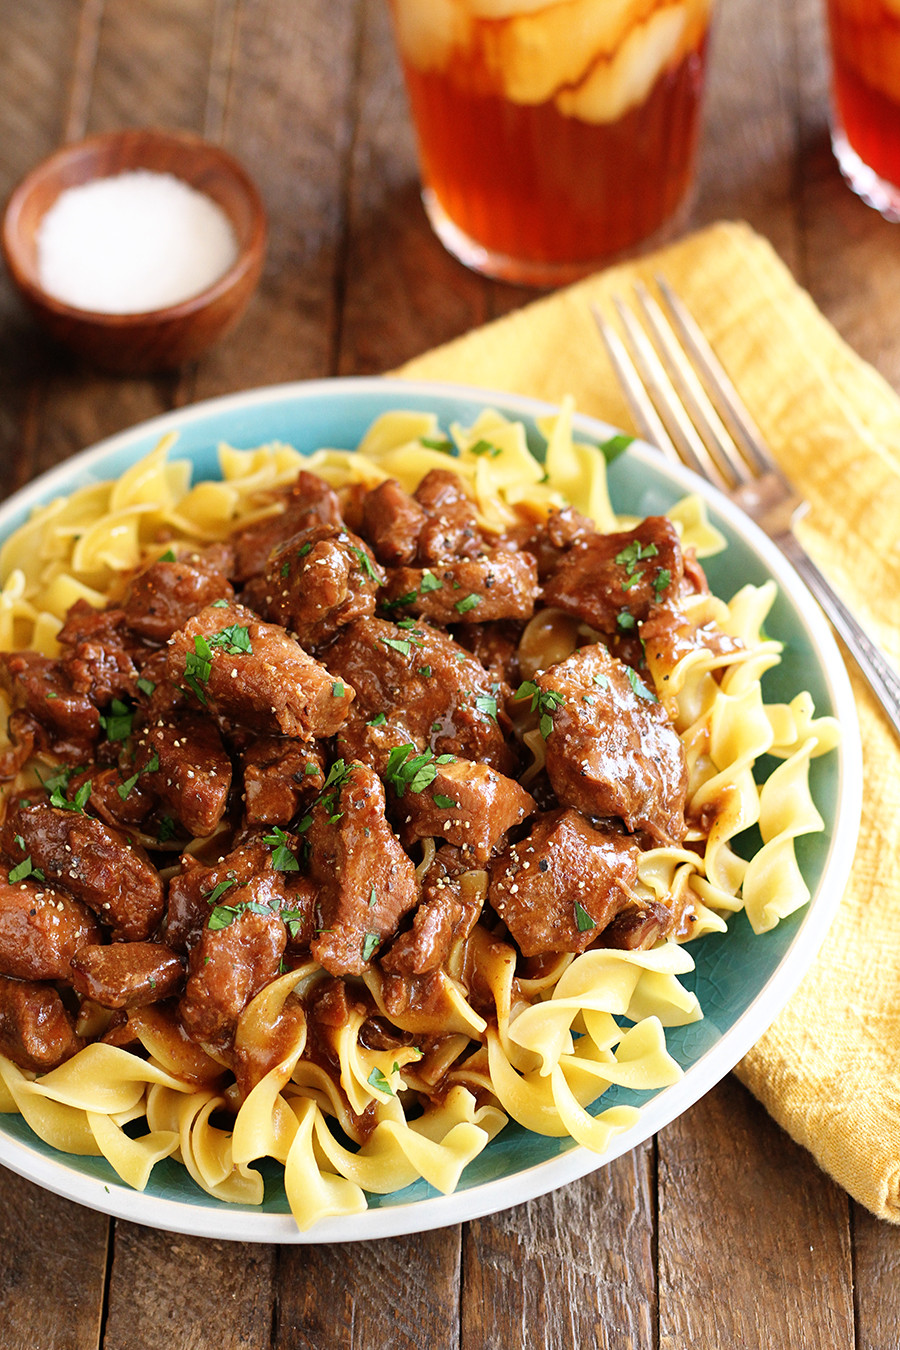 Beef and Noodles Recipe Luxury Slow Cooker Beef and Noodles southern Bite